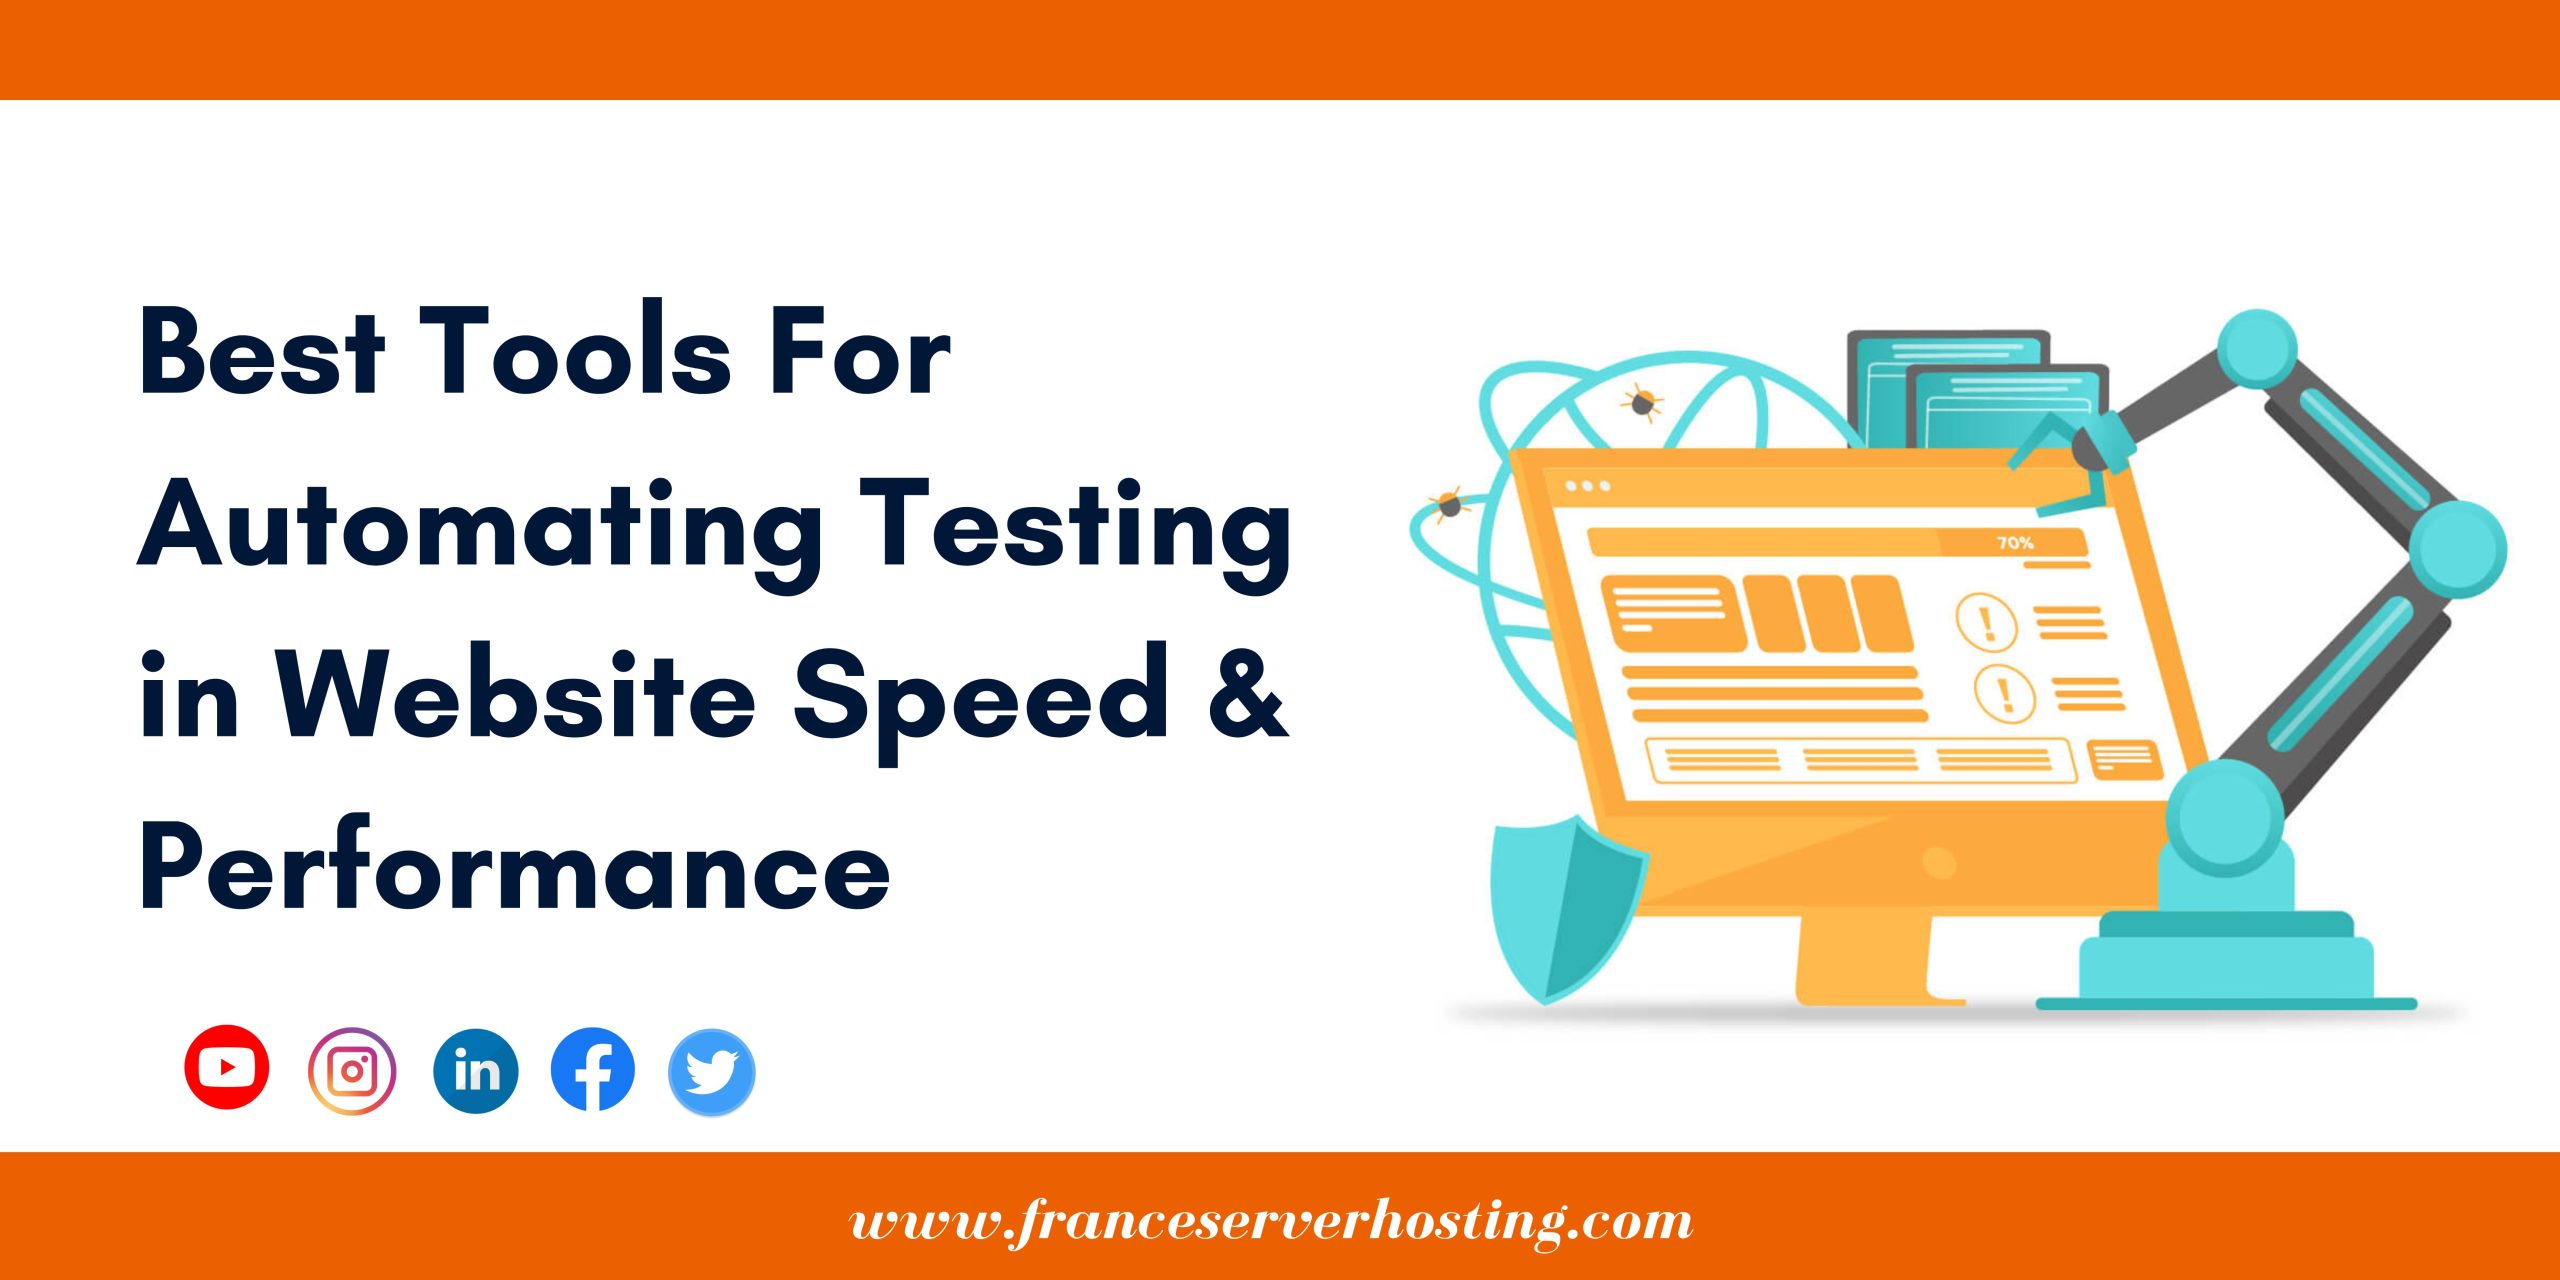 5 Tools For Automating Testing in Website Speed & Performance